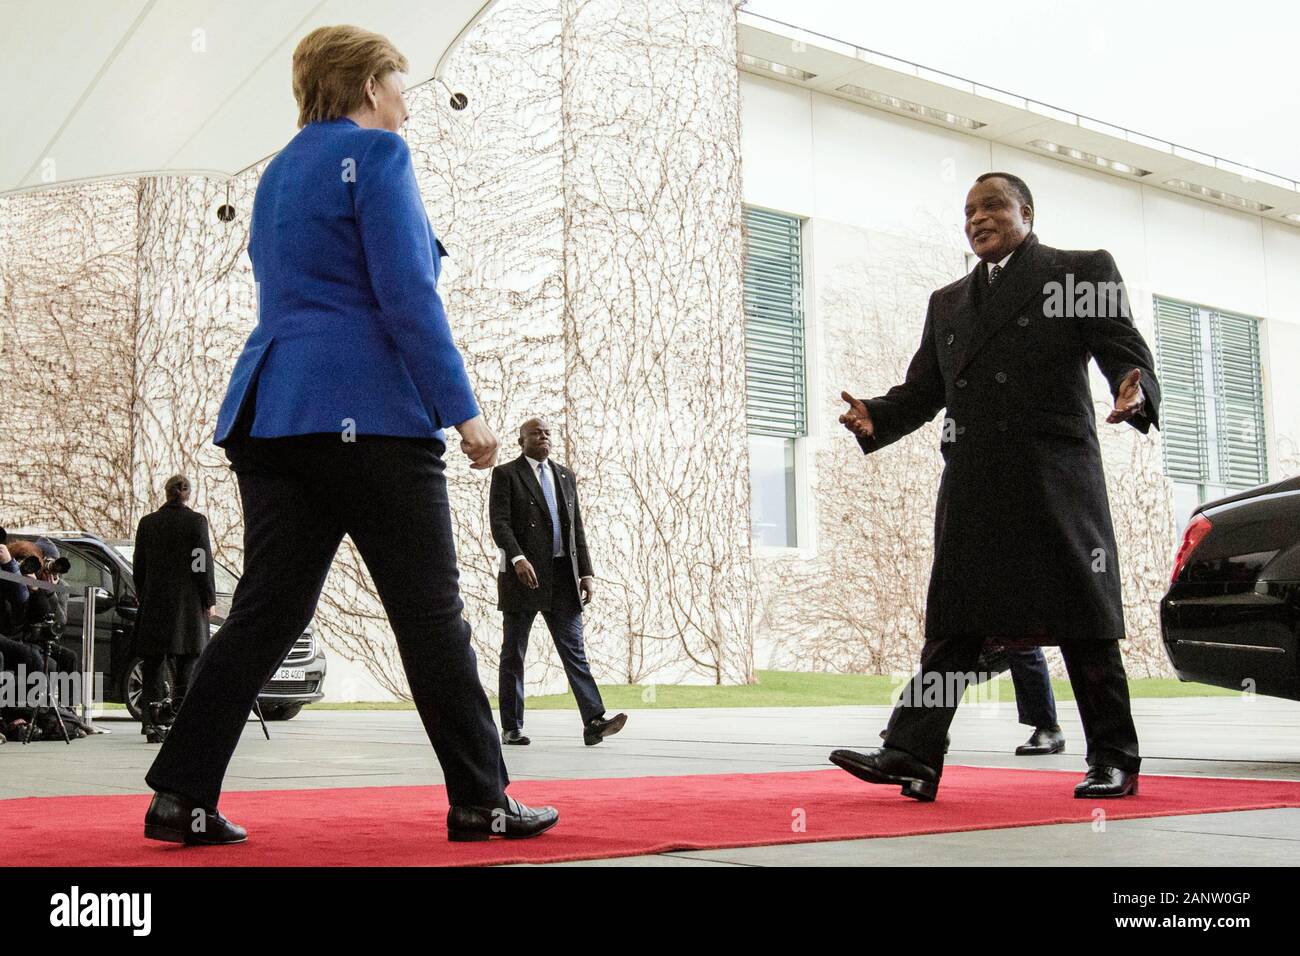 Berlin, Germany. 19th Jan, 2020. Federal Chancellor Angela Merkel (CDU) receives Denis Sassou Nguesso, President of the Republic of Congo, in front of the Federal Chancellery for the Libya Conference. The aim of the conference is a lasting ceasefire in the civil war country. Credit: Carsten Koall/dpa/Alamy Live News Stock Photo